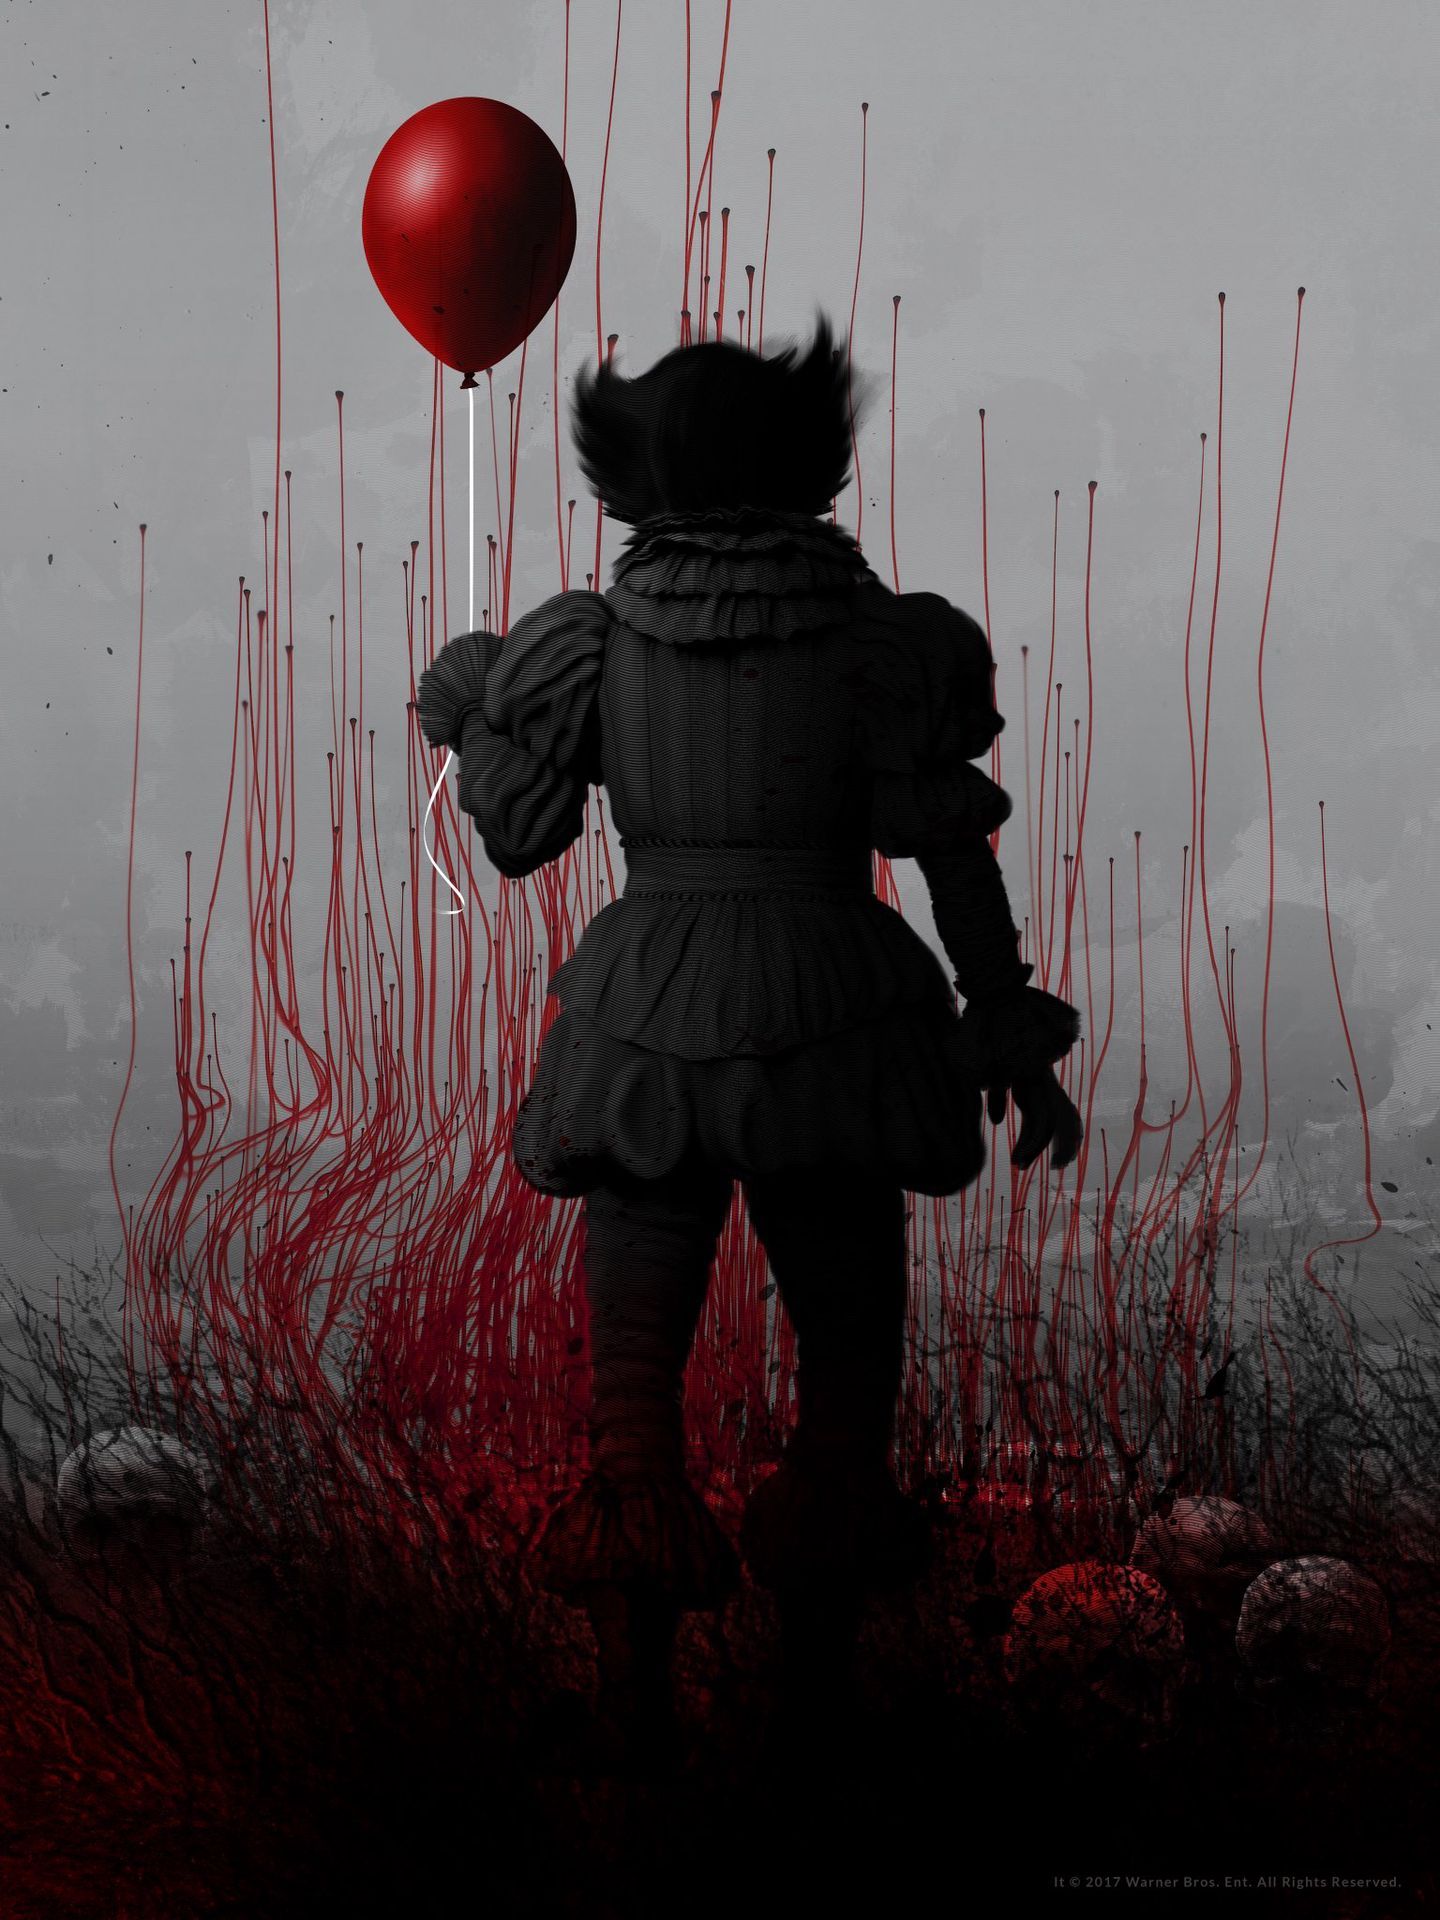 Pennywise Image. Scary wallpaper, Clown horror, Horror movie art